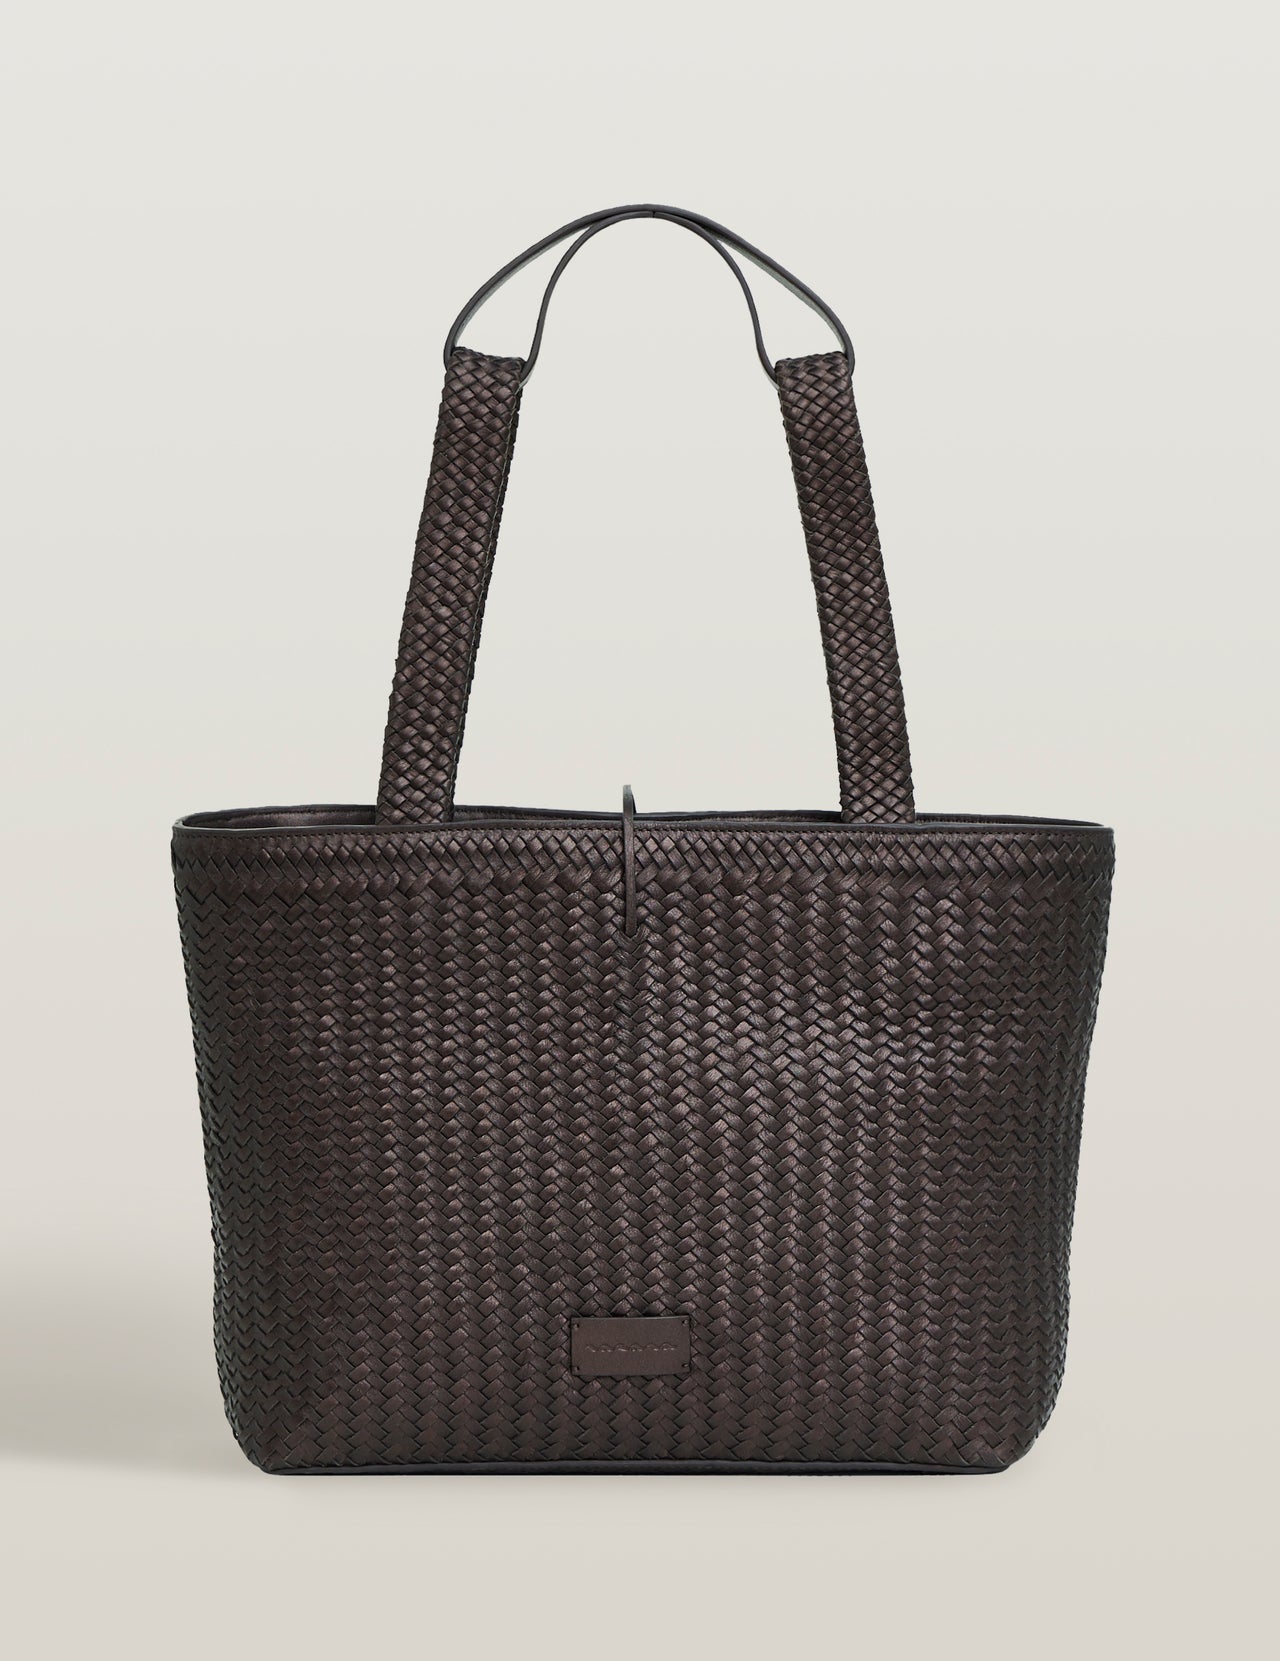  Metallic Brown Handwoven Leather Double Strap Tote Bag 